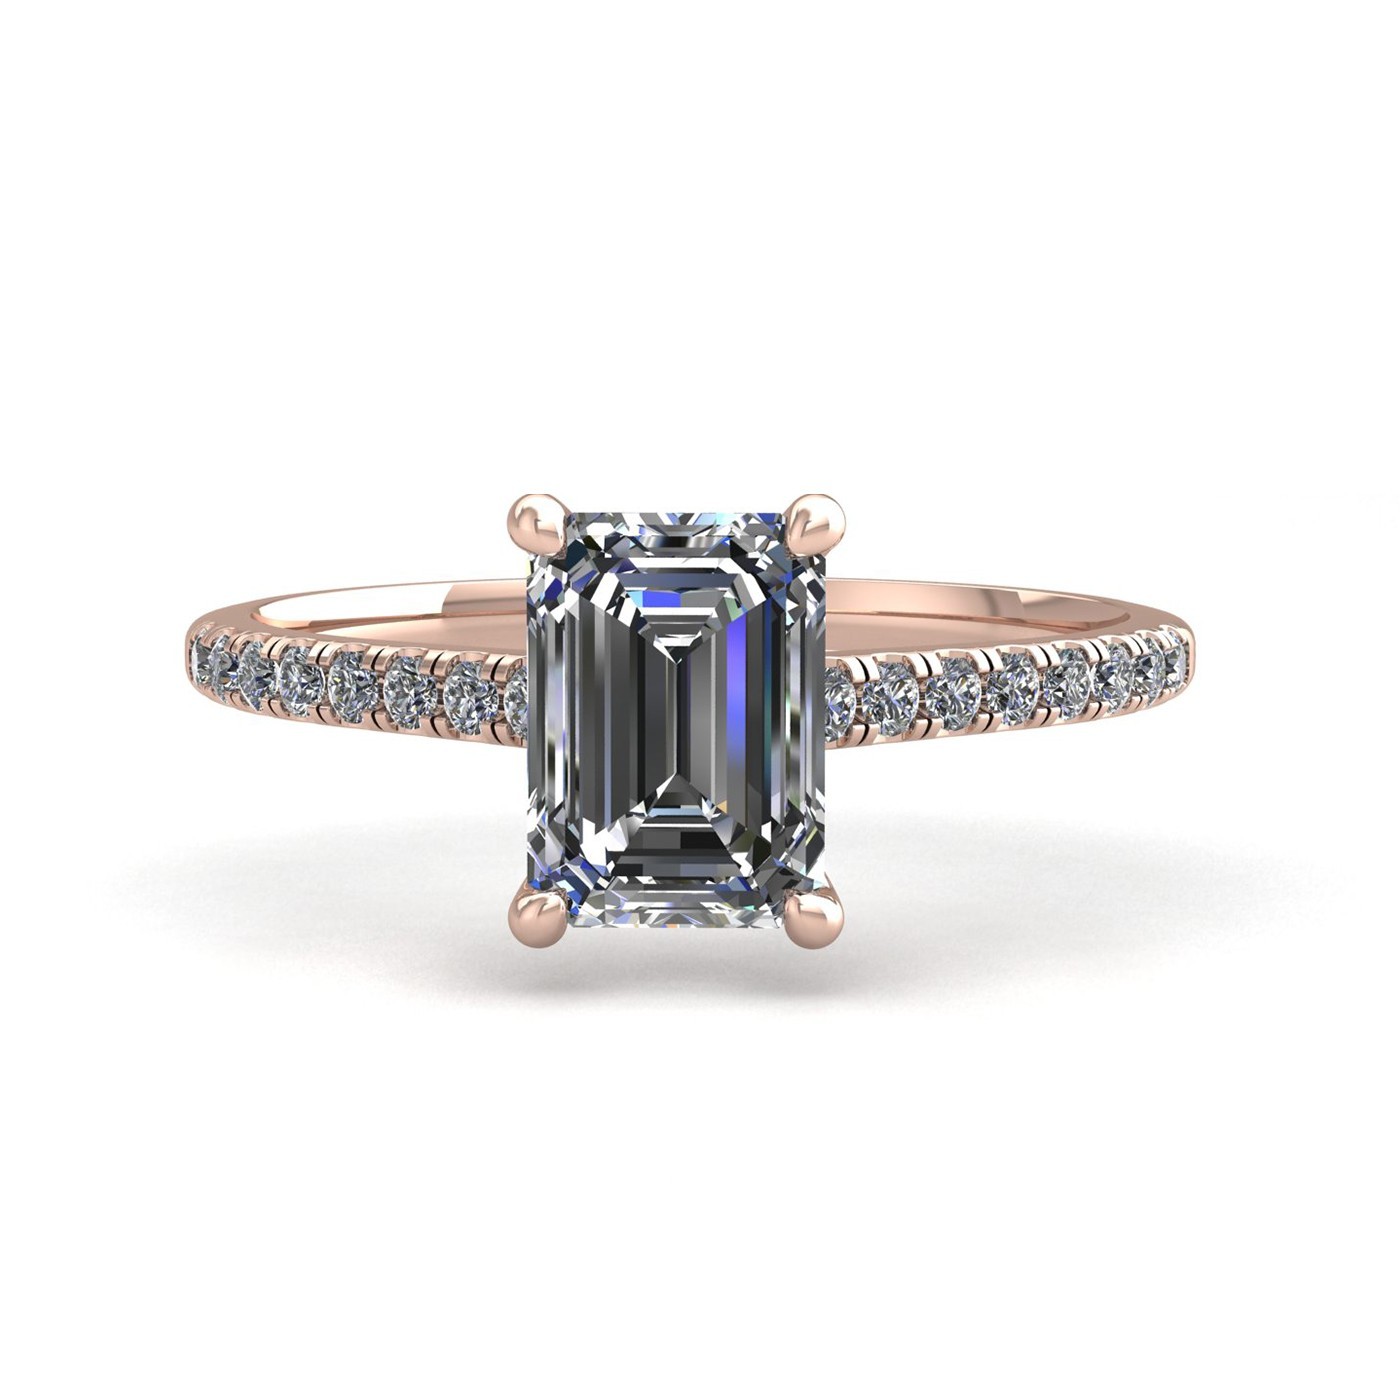 18k rose gold 1.2ct 4 prongs emerald cut diamond engagement ring with whisper thin pavÉ set band Photos & images